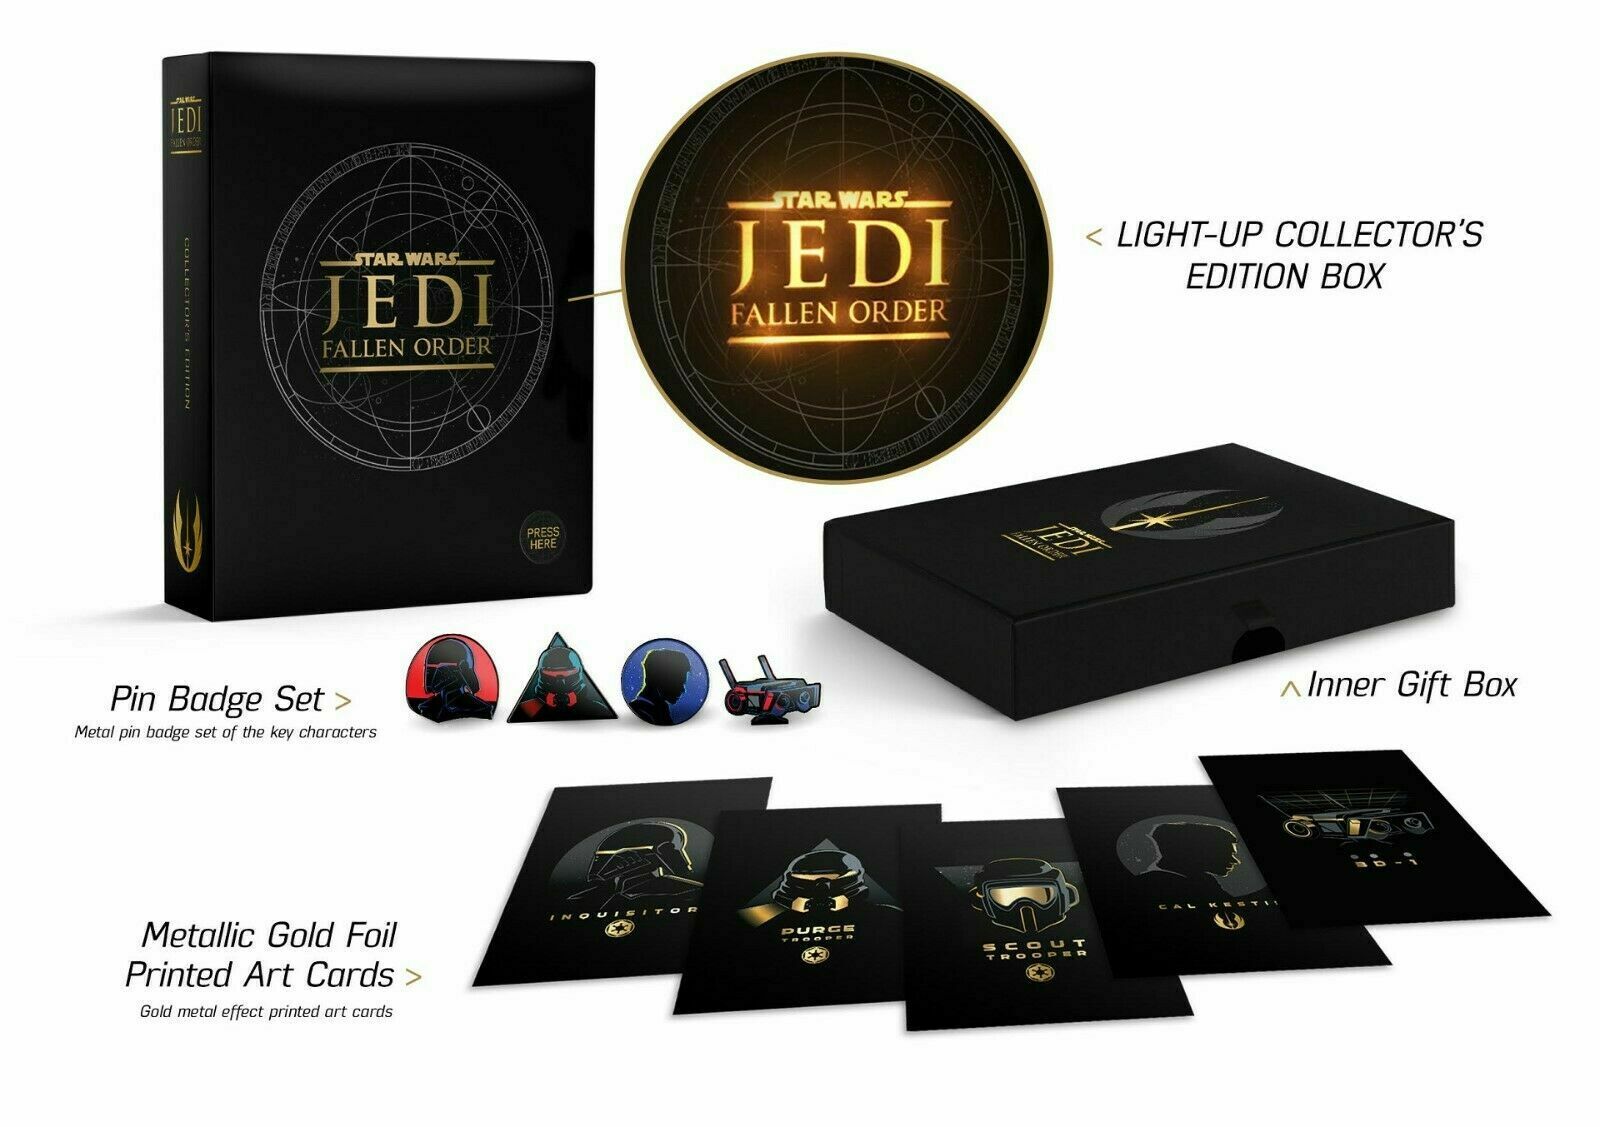 Star Wars Jedi Fallen Order With Light Up Collectors EDITION